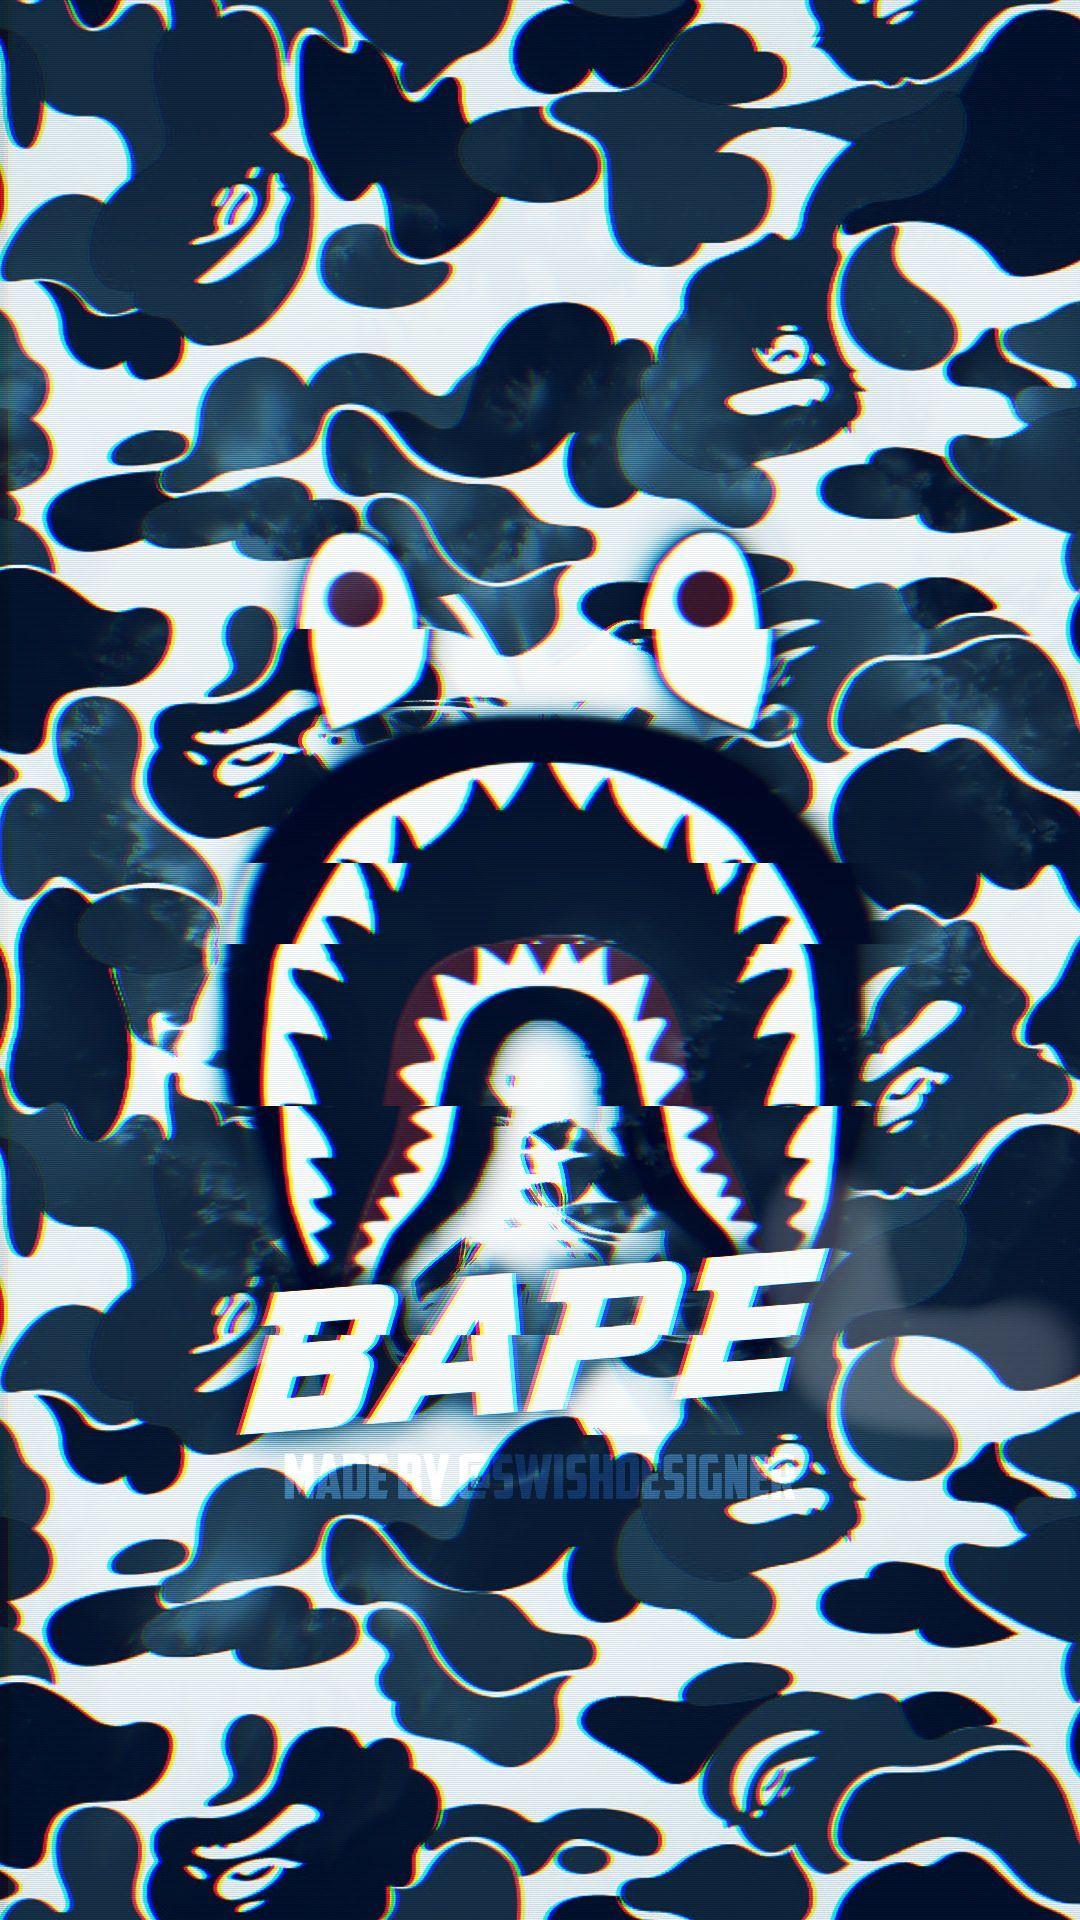 Free Supreme/Bape Wallpaper (You Can Change The Text) 